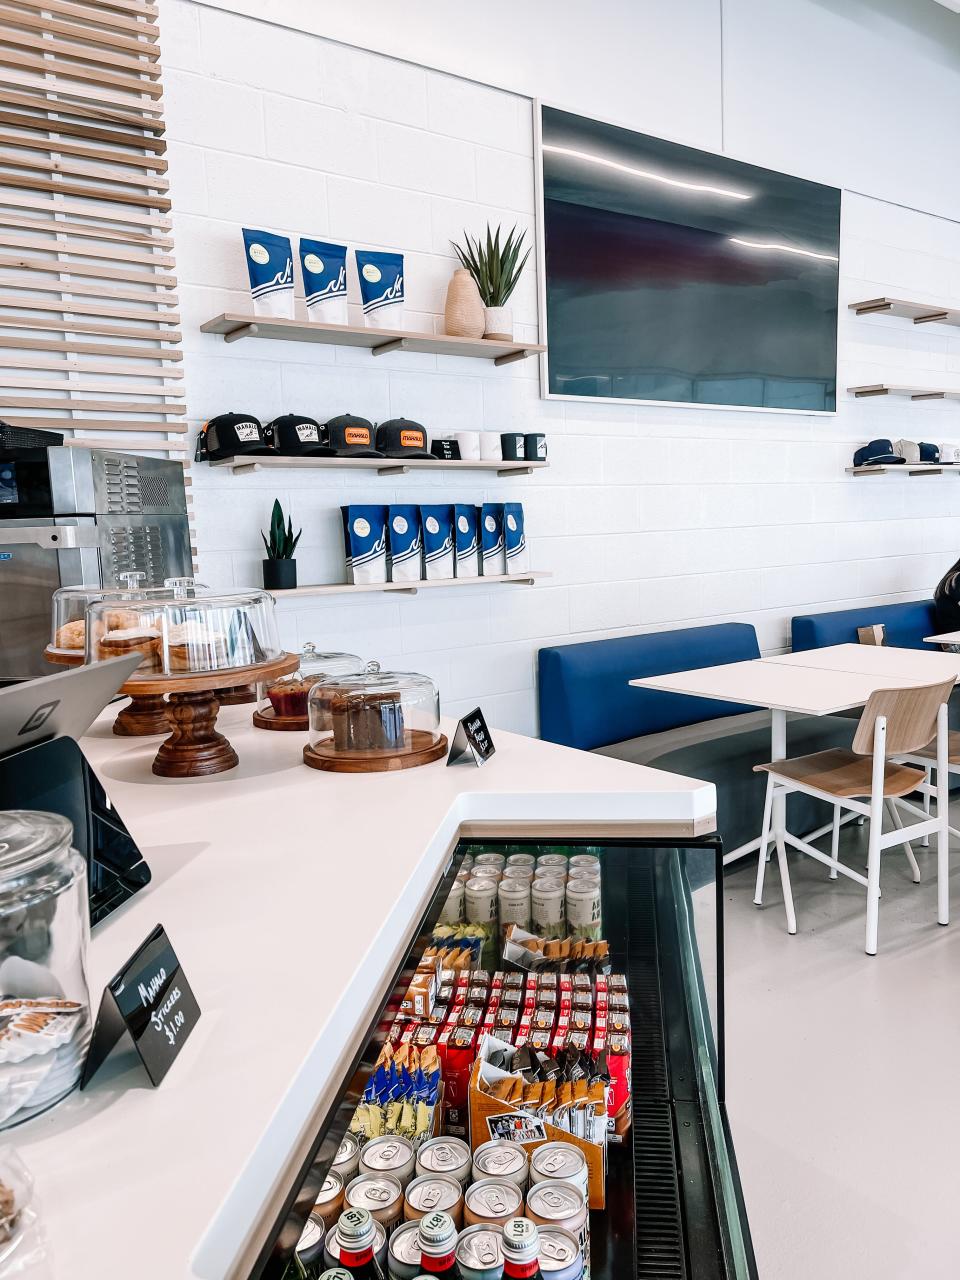 The Mahalo coffee shop inside Harper Auto Wash sells espresso drinks, bags of coffee beans, merchandise, baked goods and cold drinks. Alcoa, May 2, 2022.